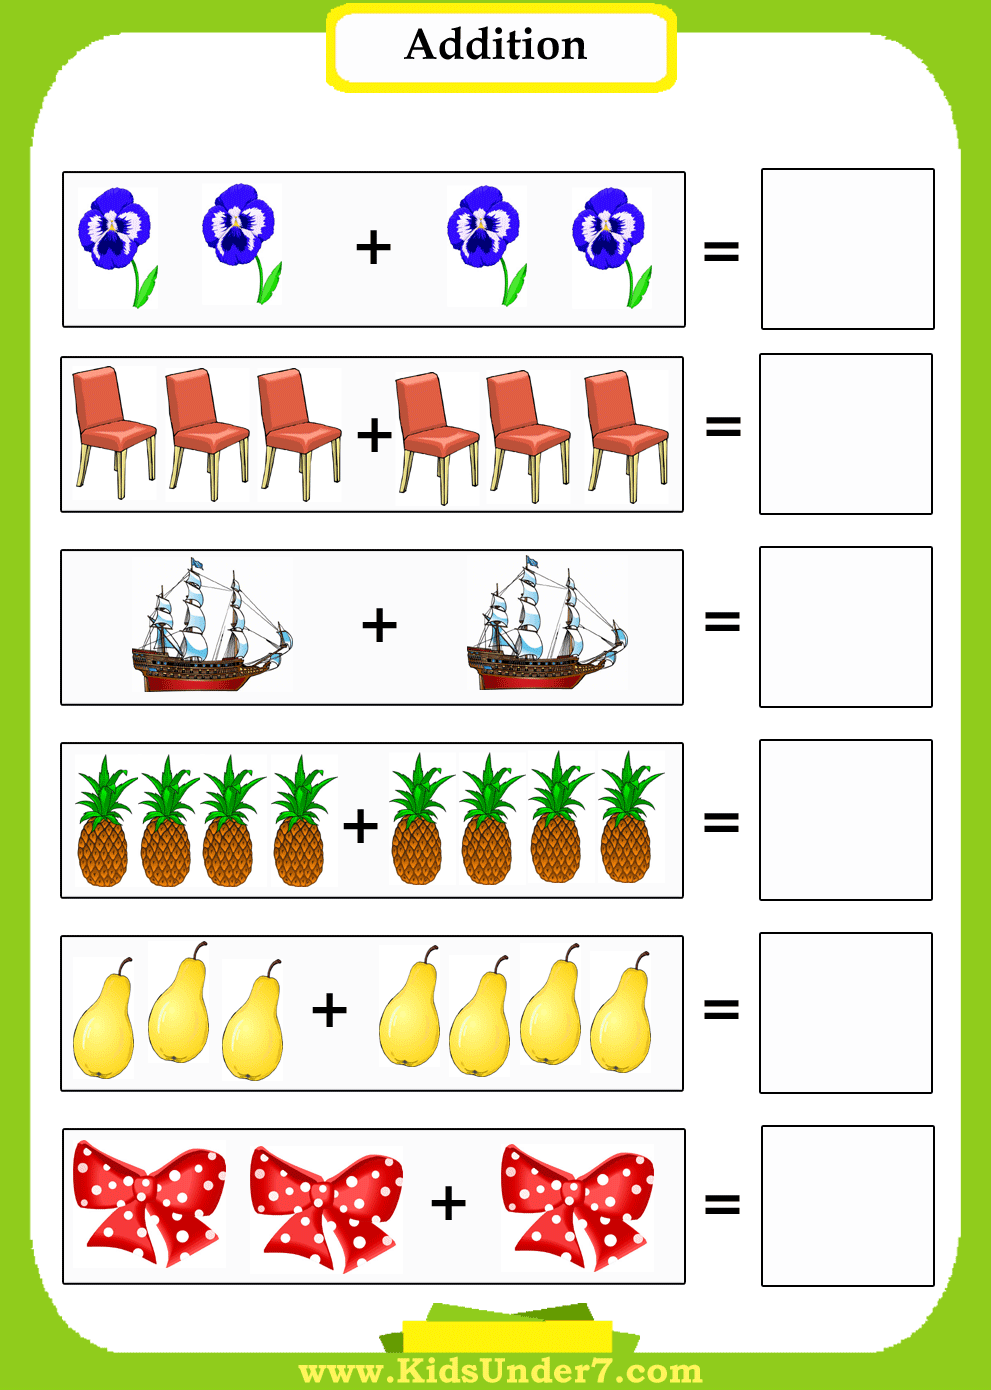 addition-clipart-addition-worksheet-picture-34160-addition-clipart